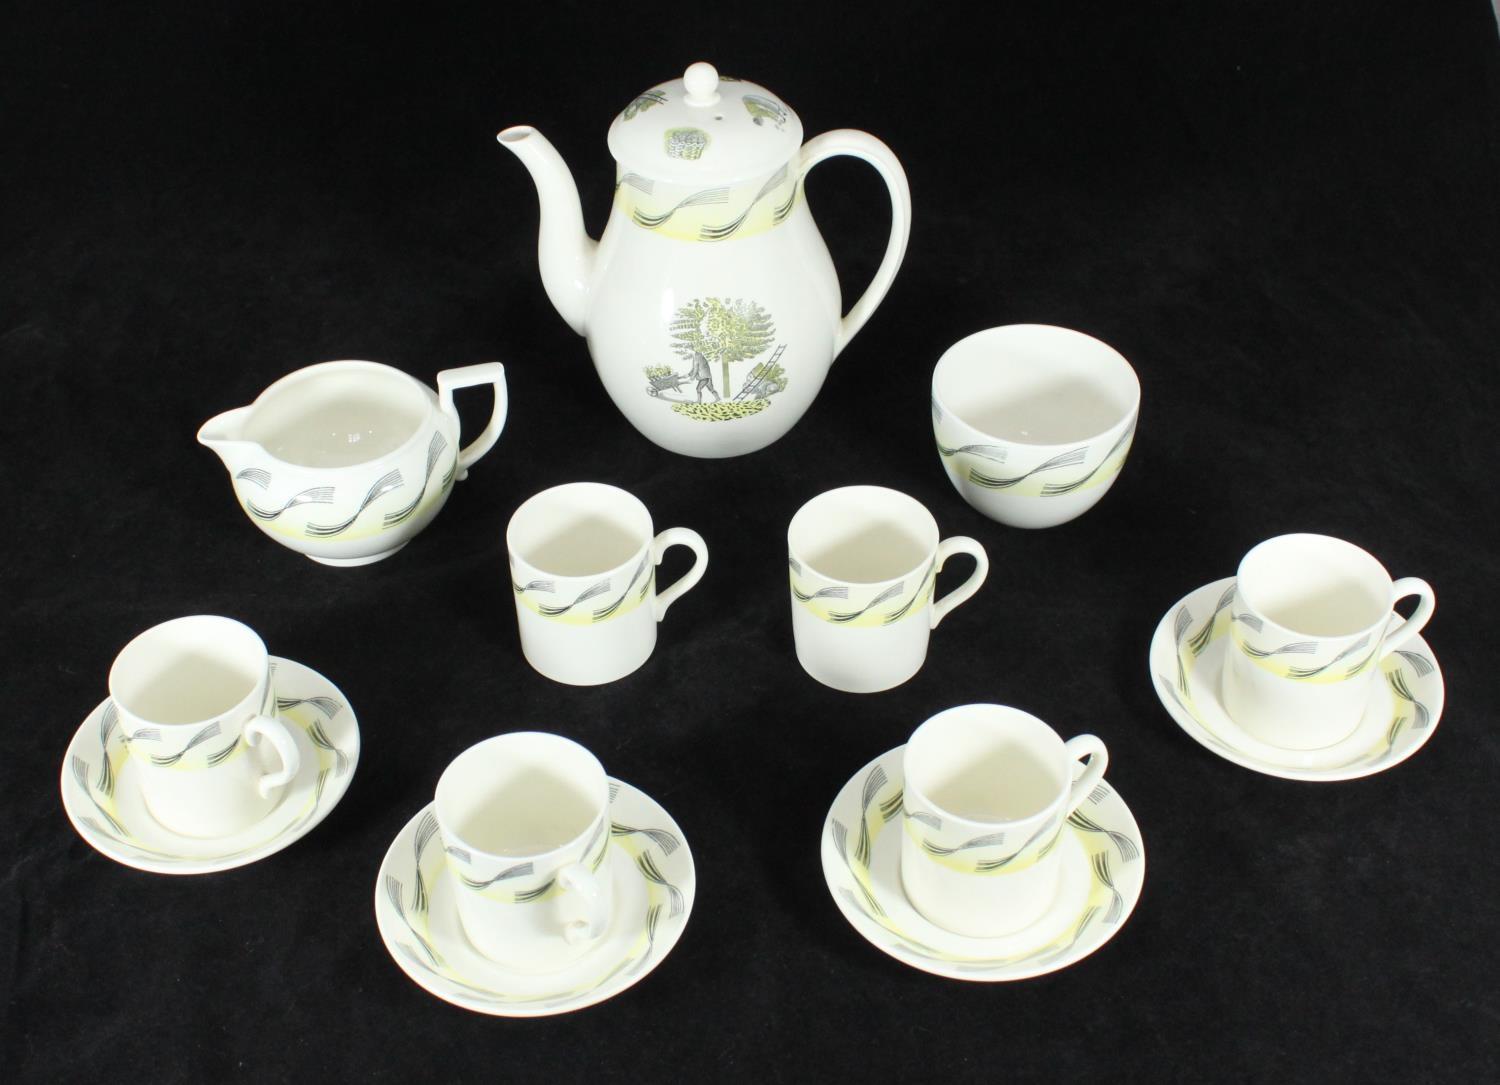 A Wedgwood 'Garden' pattern part coffee set designed by Eric Ravilious, comprising six coffee